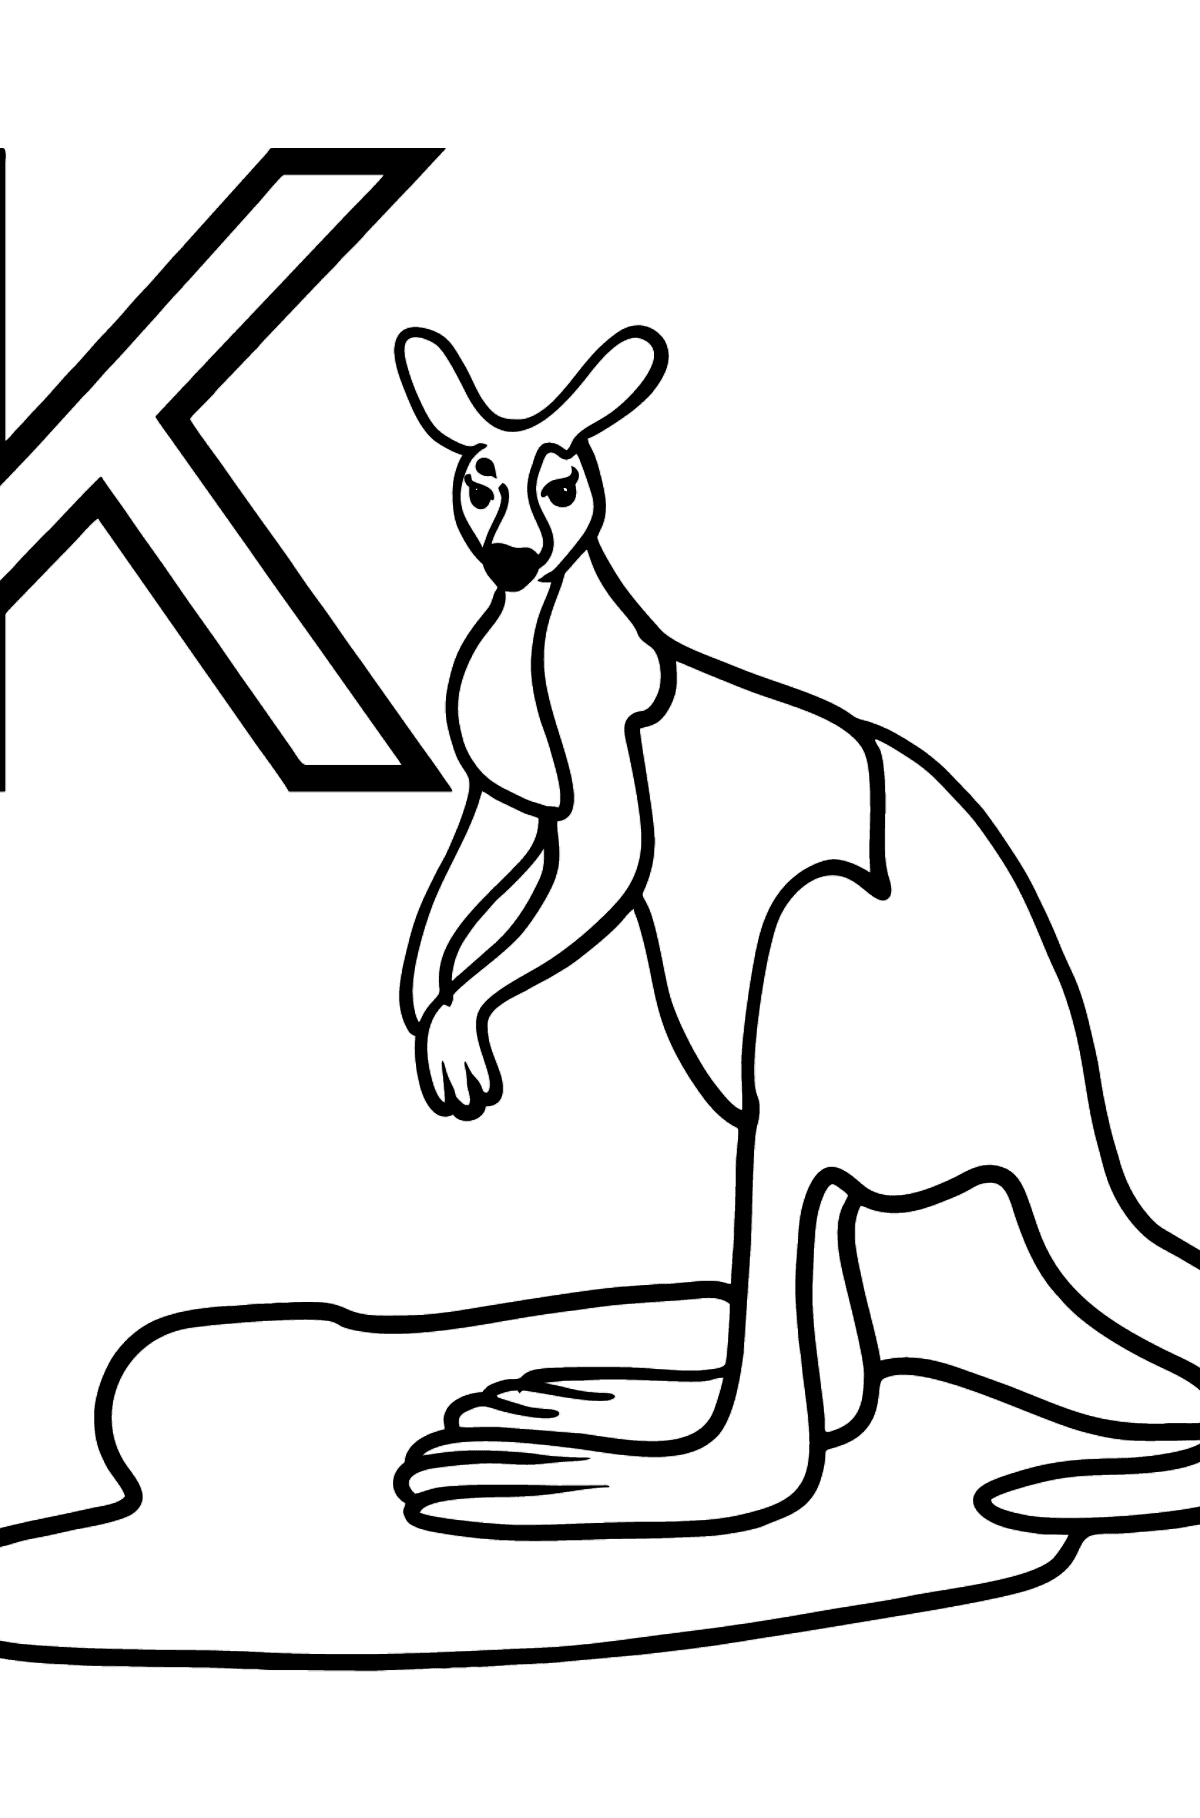 English Letter K coloring pages - KANGAROO - Coloring Pages for Kids